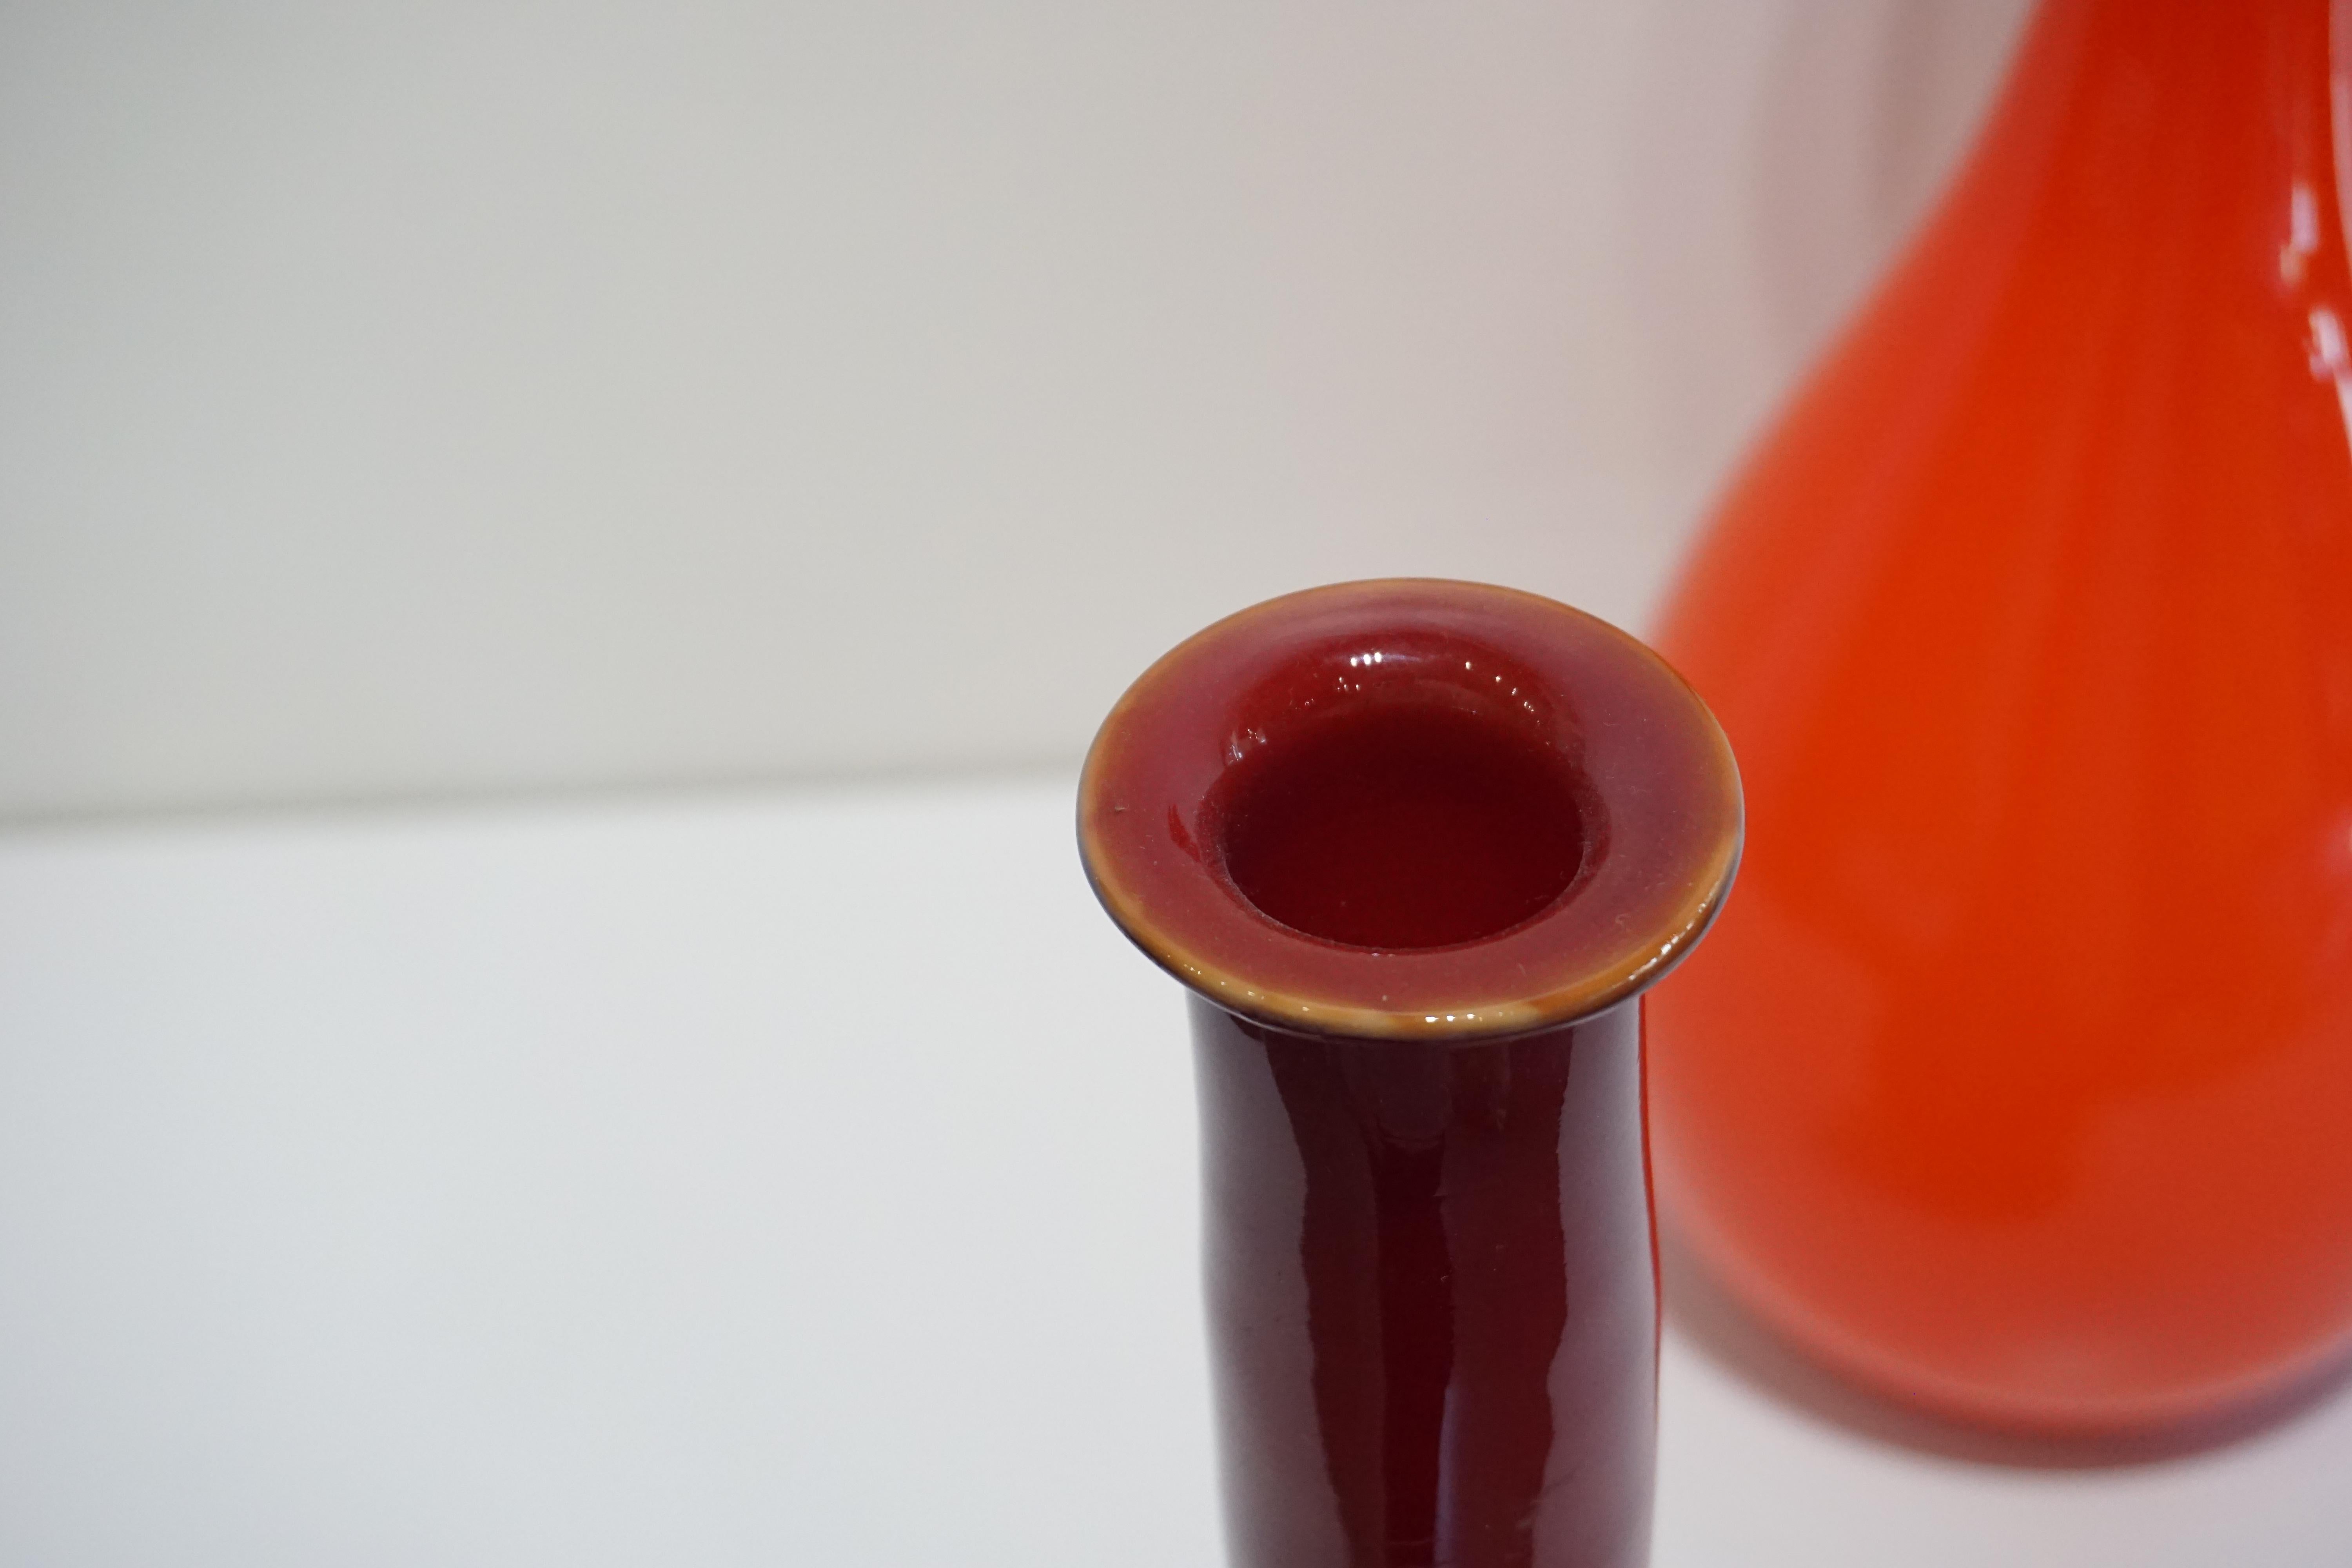 Vintage Burgundy Murano glass vase, in a genie bottle shape, featuring glass from the Venetian island of Murano, a place known for its production of vibrant and unique glass products. Unusual solid color, mouth blown, elegant in its simplicity.